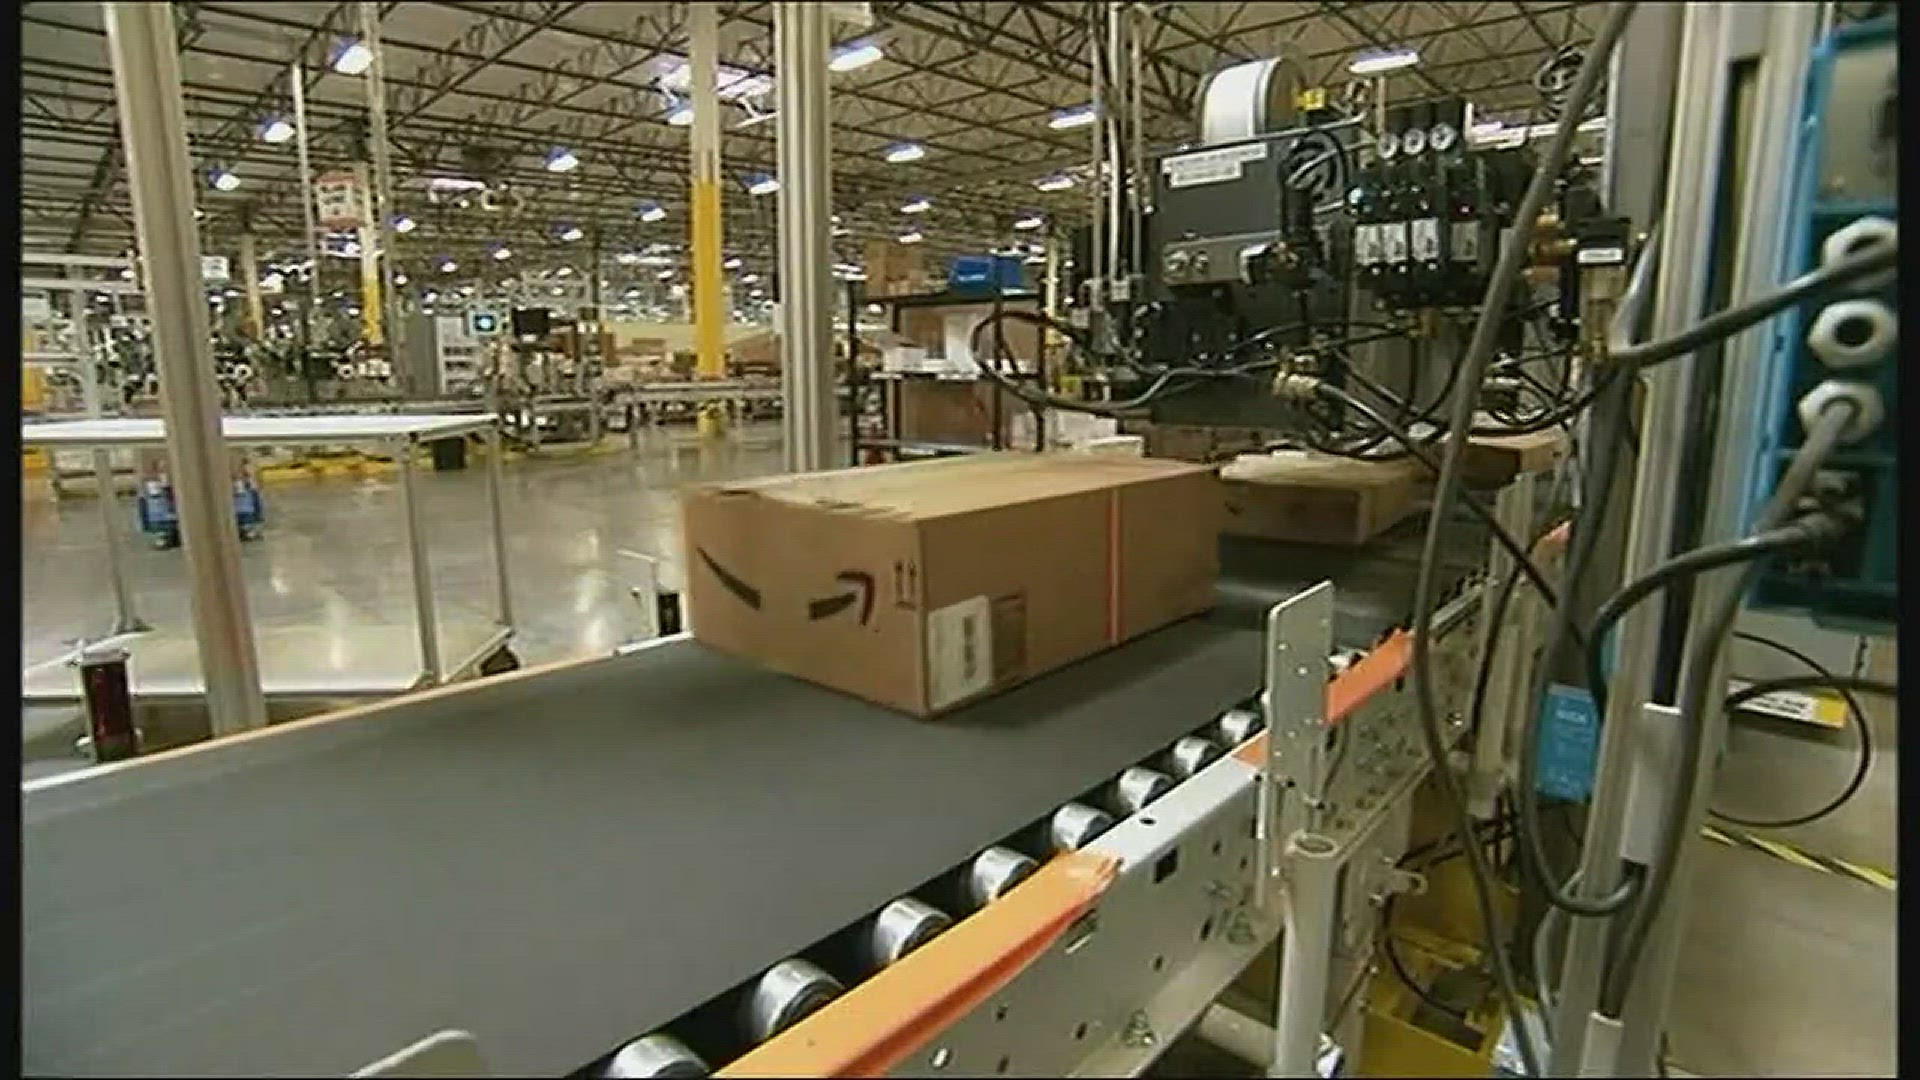 Charlotte's two fulfillment centers for Amazon are working extra hard to help get $2 billion worth of sales on Prime Day out the door.